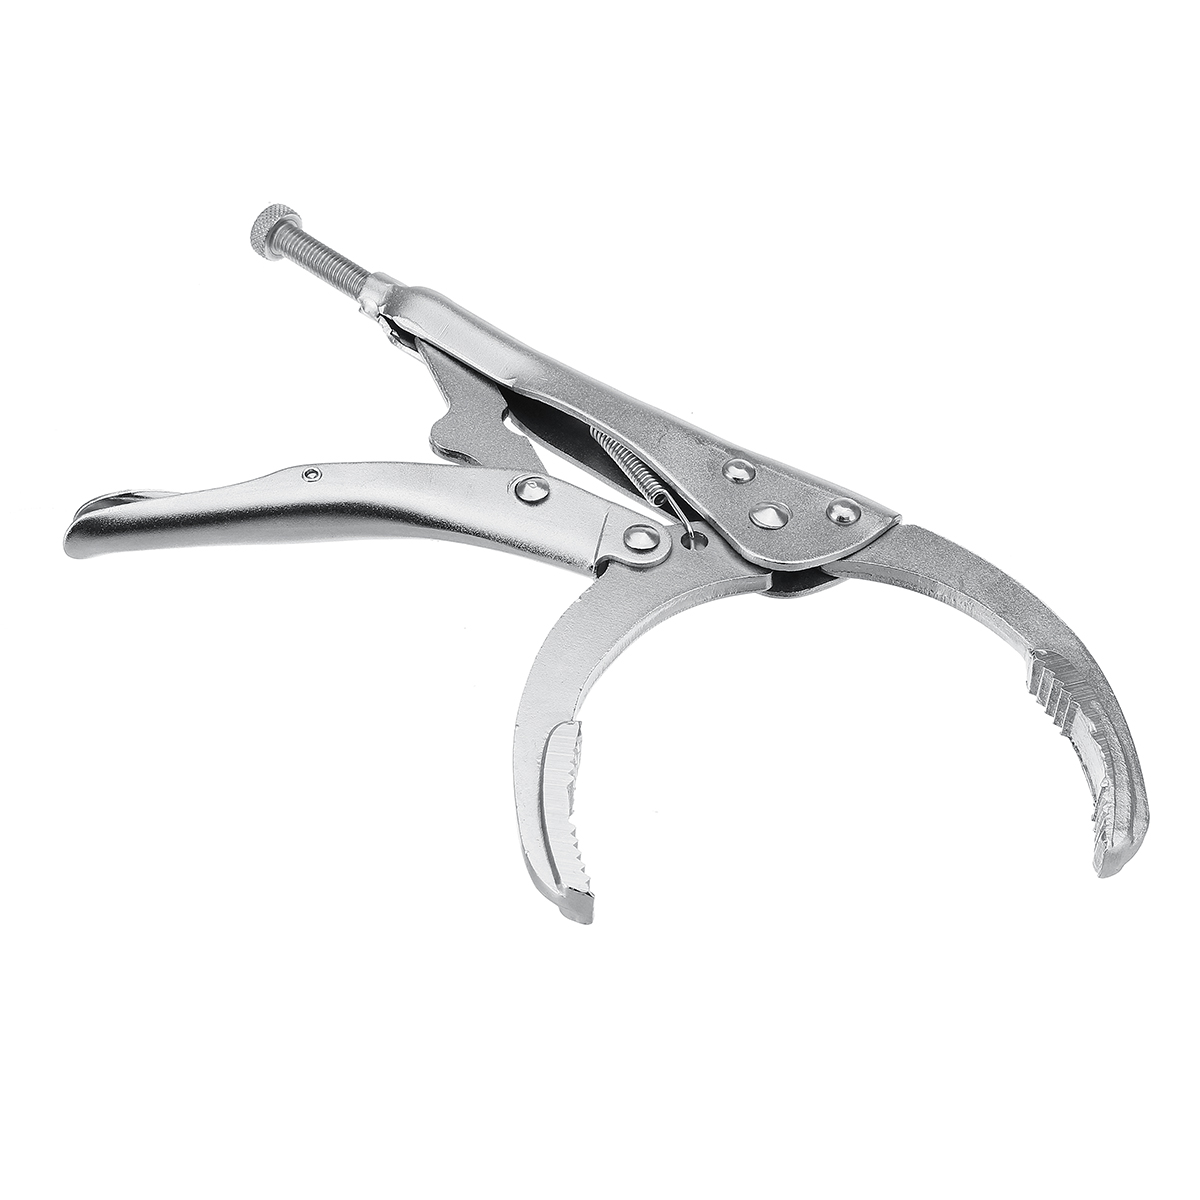 Self-Grip-Oil-Filter-Removal-Tool-Wrench-Pliers-Multi-Purpose-Hand-Remover-Tool-1446280-4